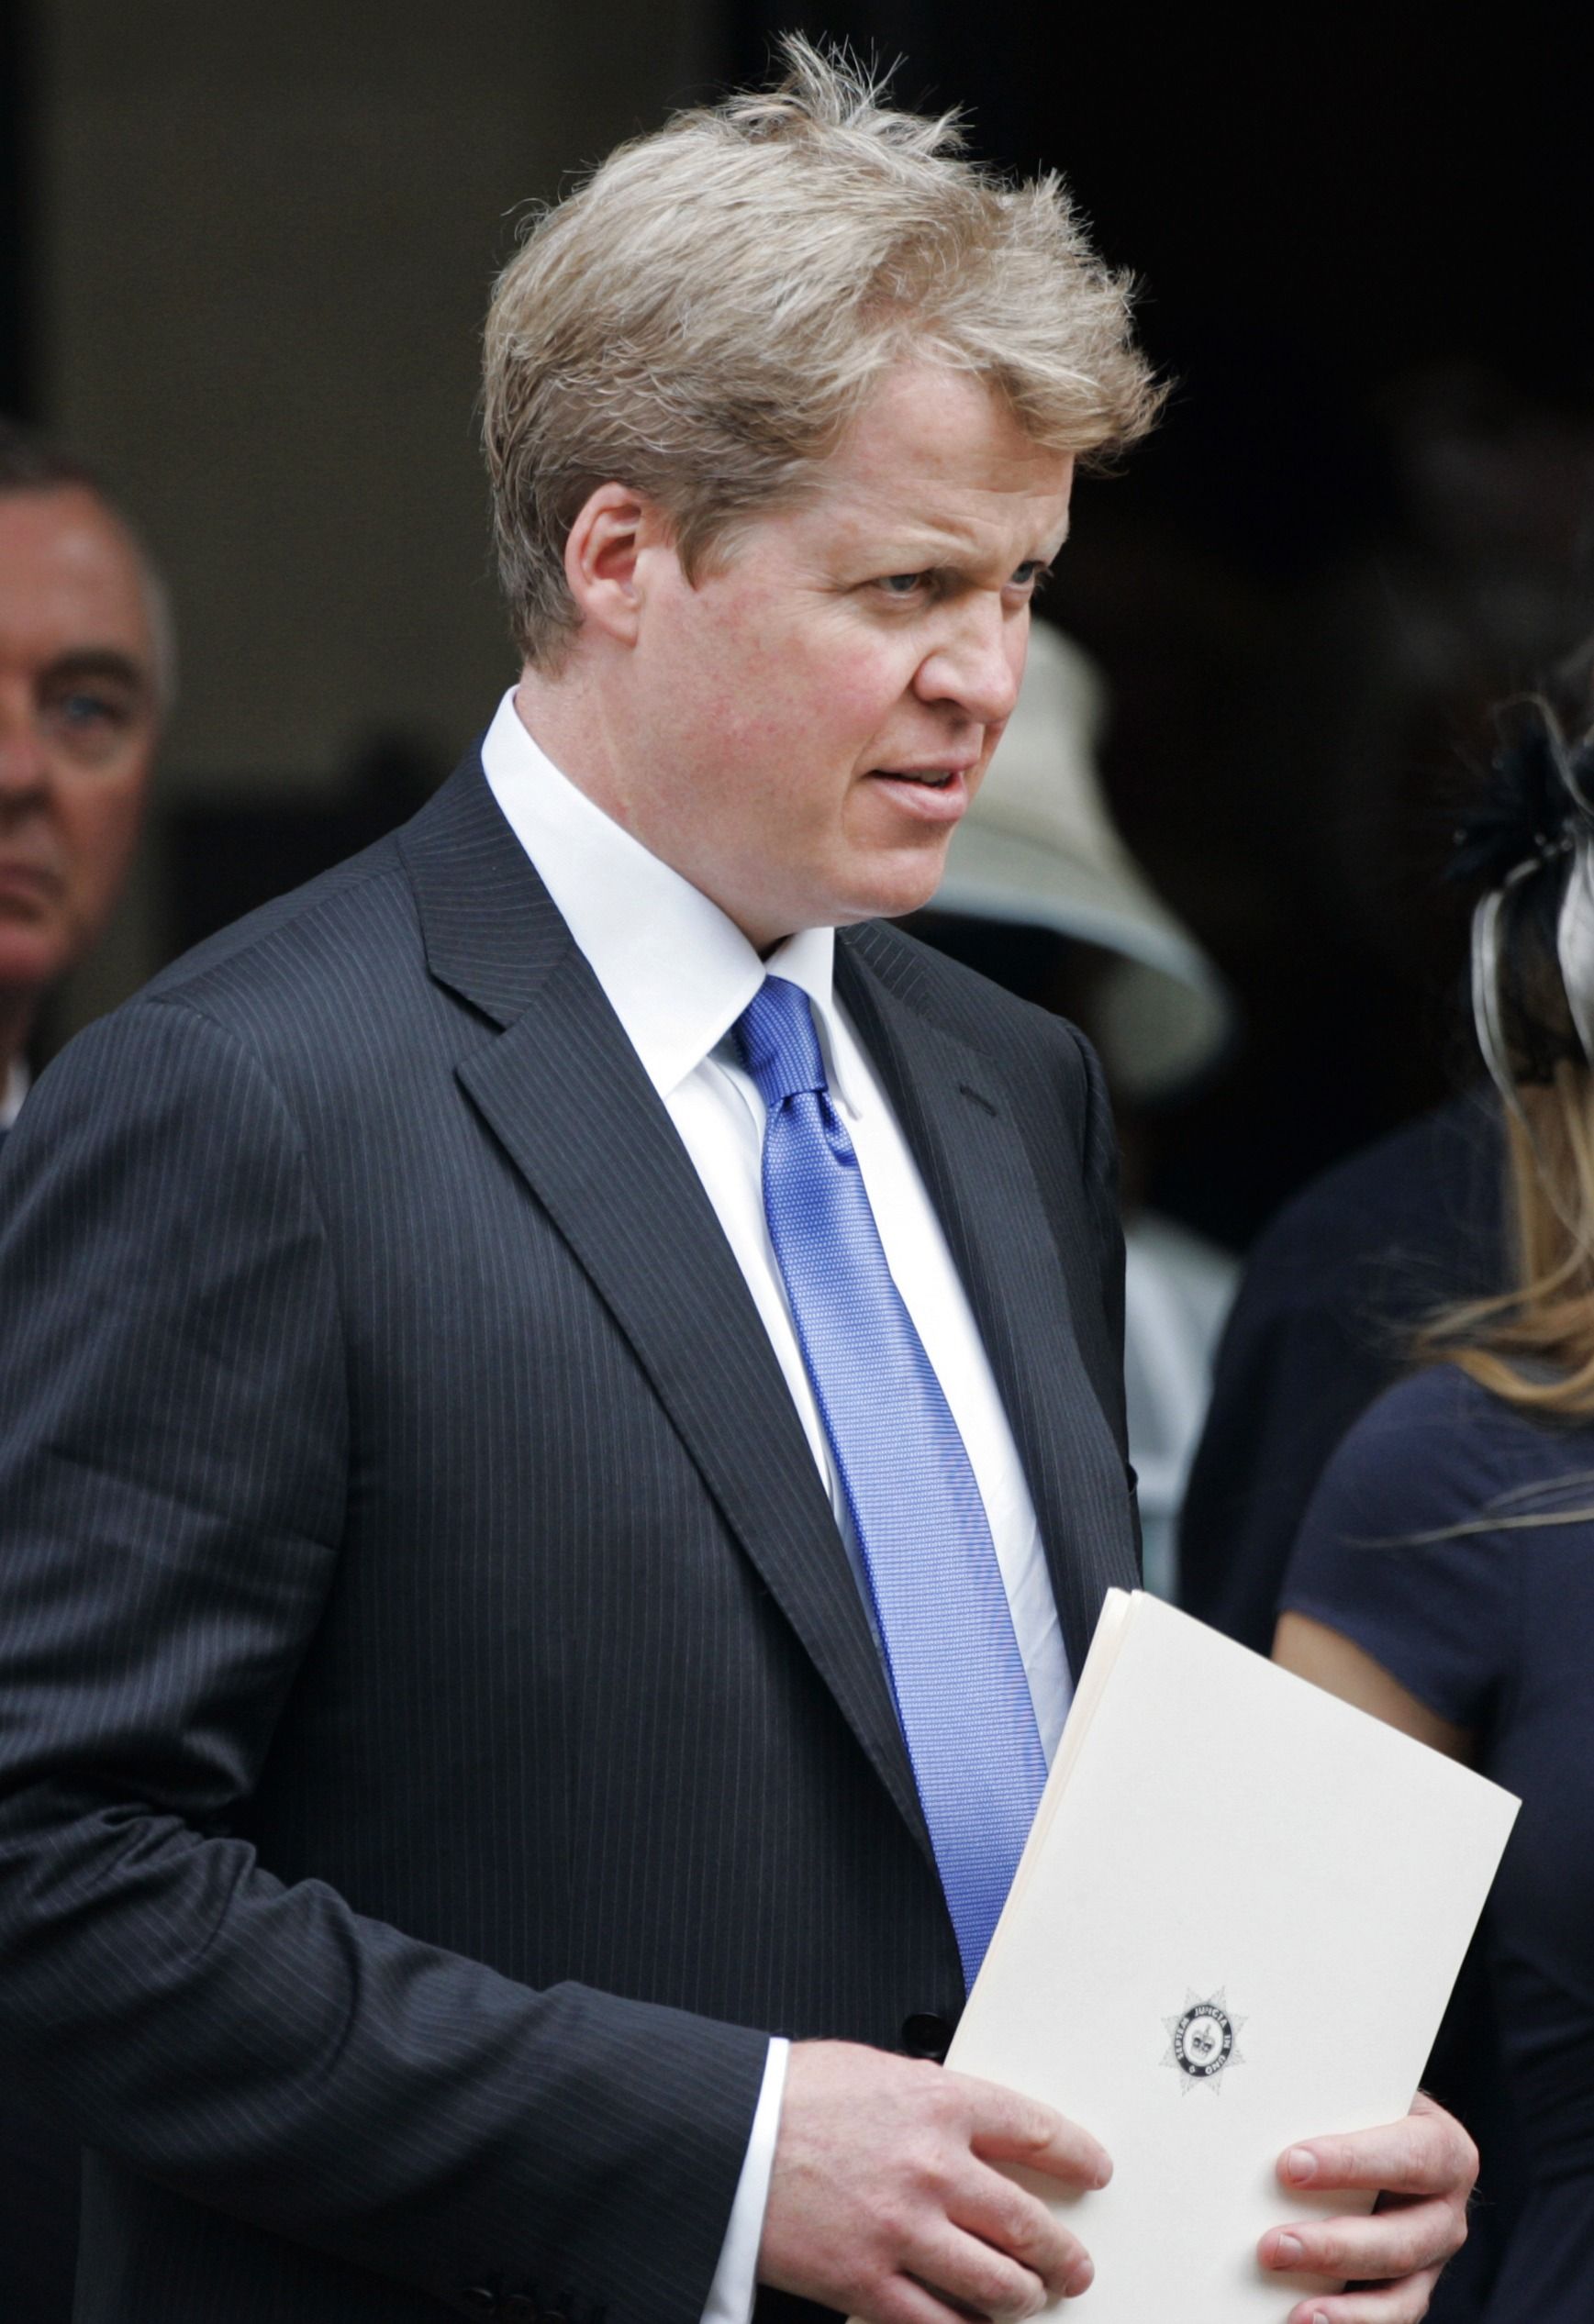 Diana's brother Charles, Earl Spencer at the 10th Anniversary Memorial Service For Diana, Princess of Wales at Guards Chapel at Wellington Barracks on August 31, 2007 | Photo: Getty Images